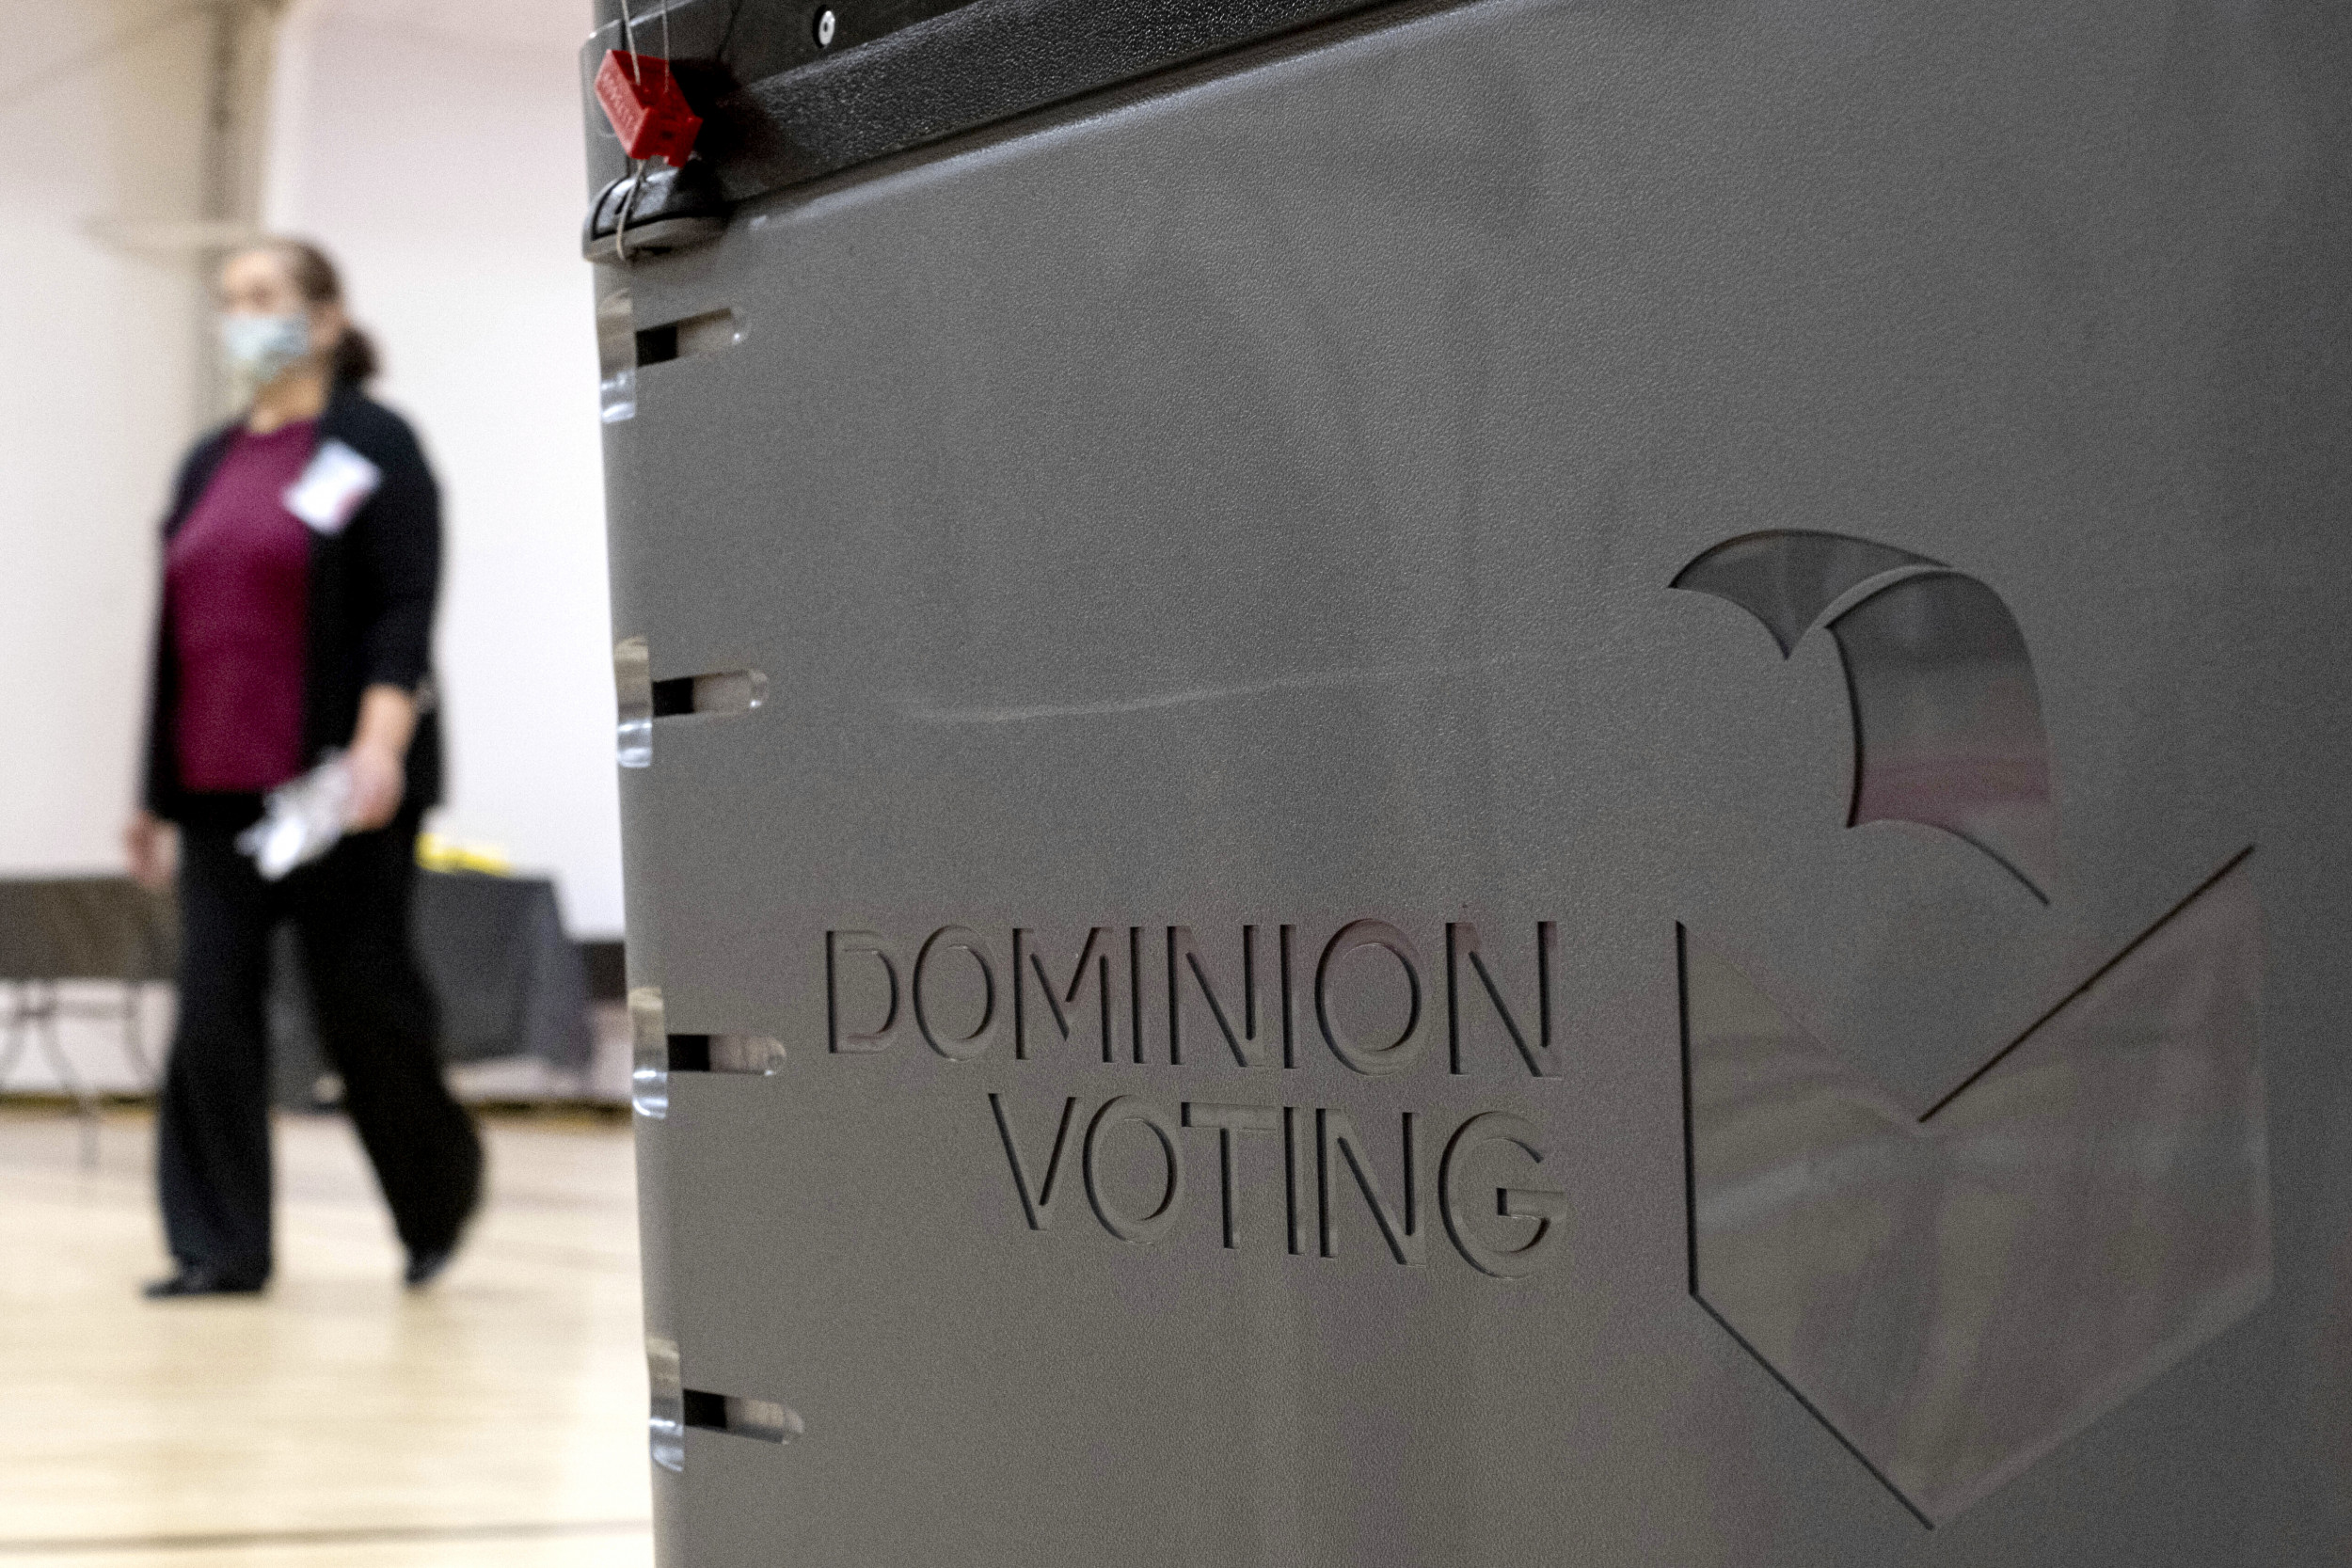 2 Lawyers Ordered to Pay Legal Fees for Dominion Voting Systems, Others